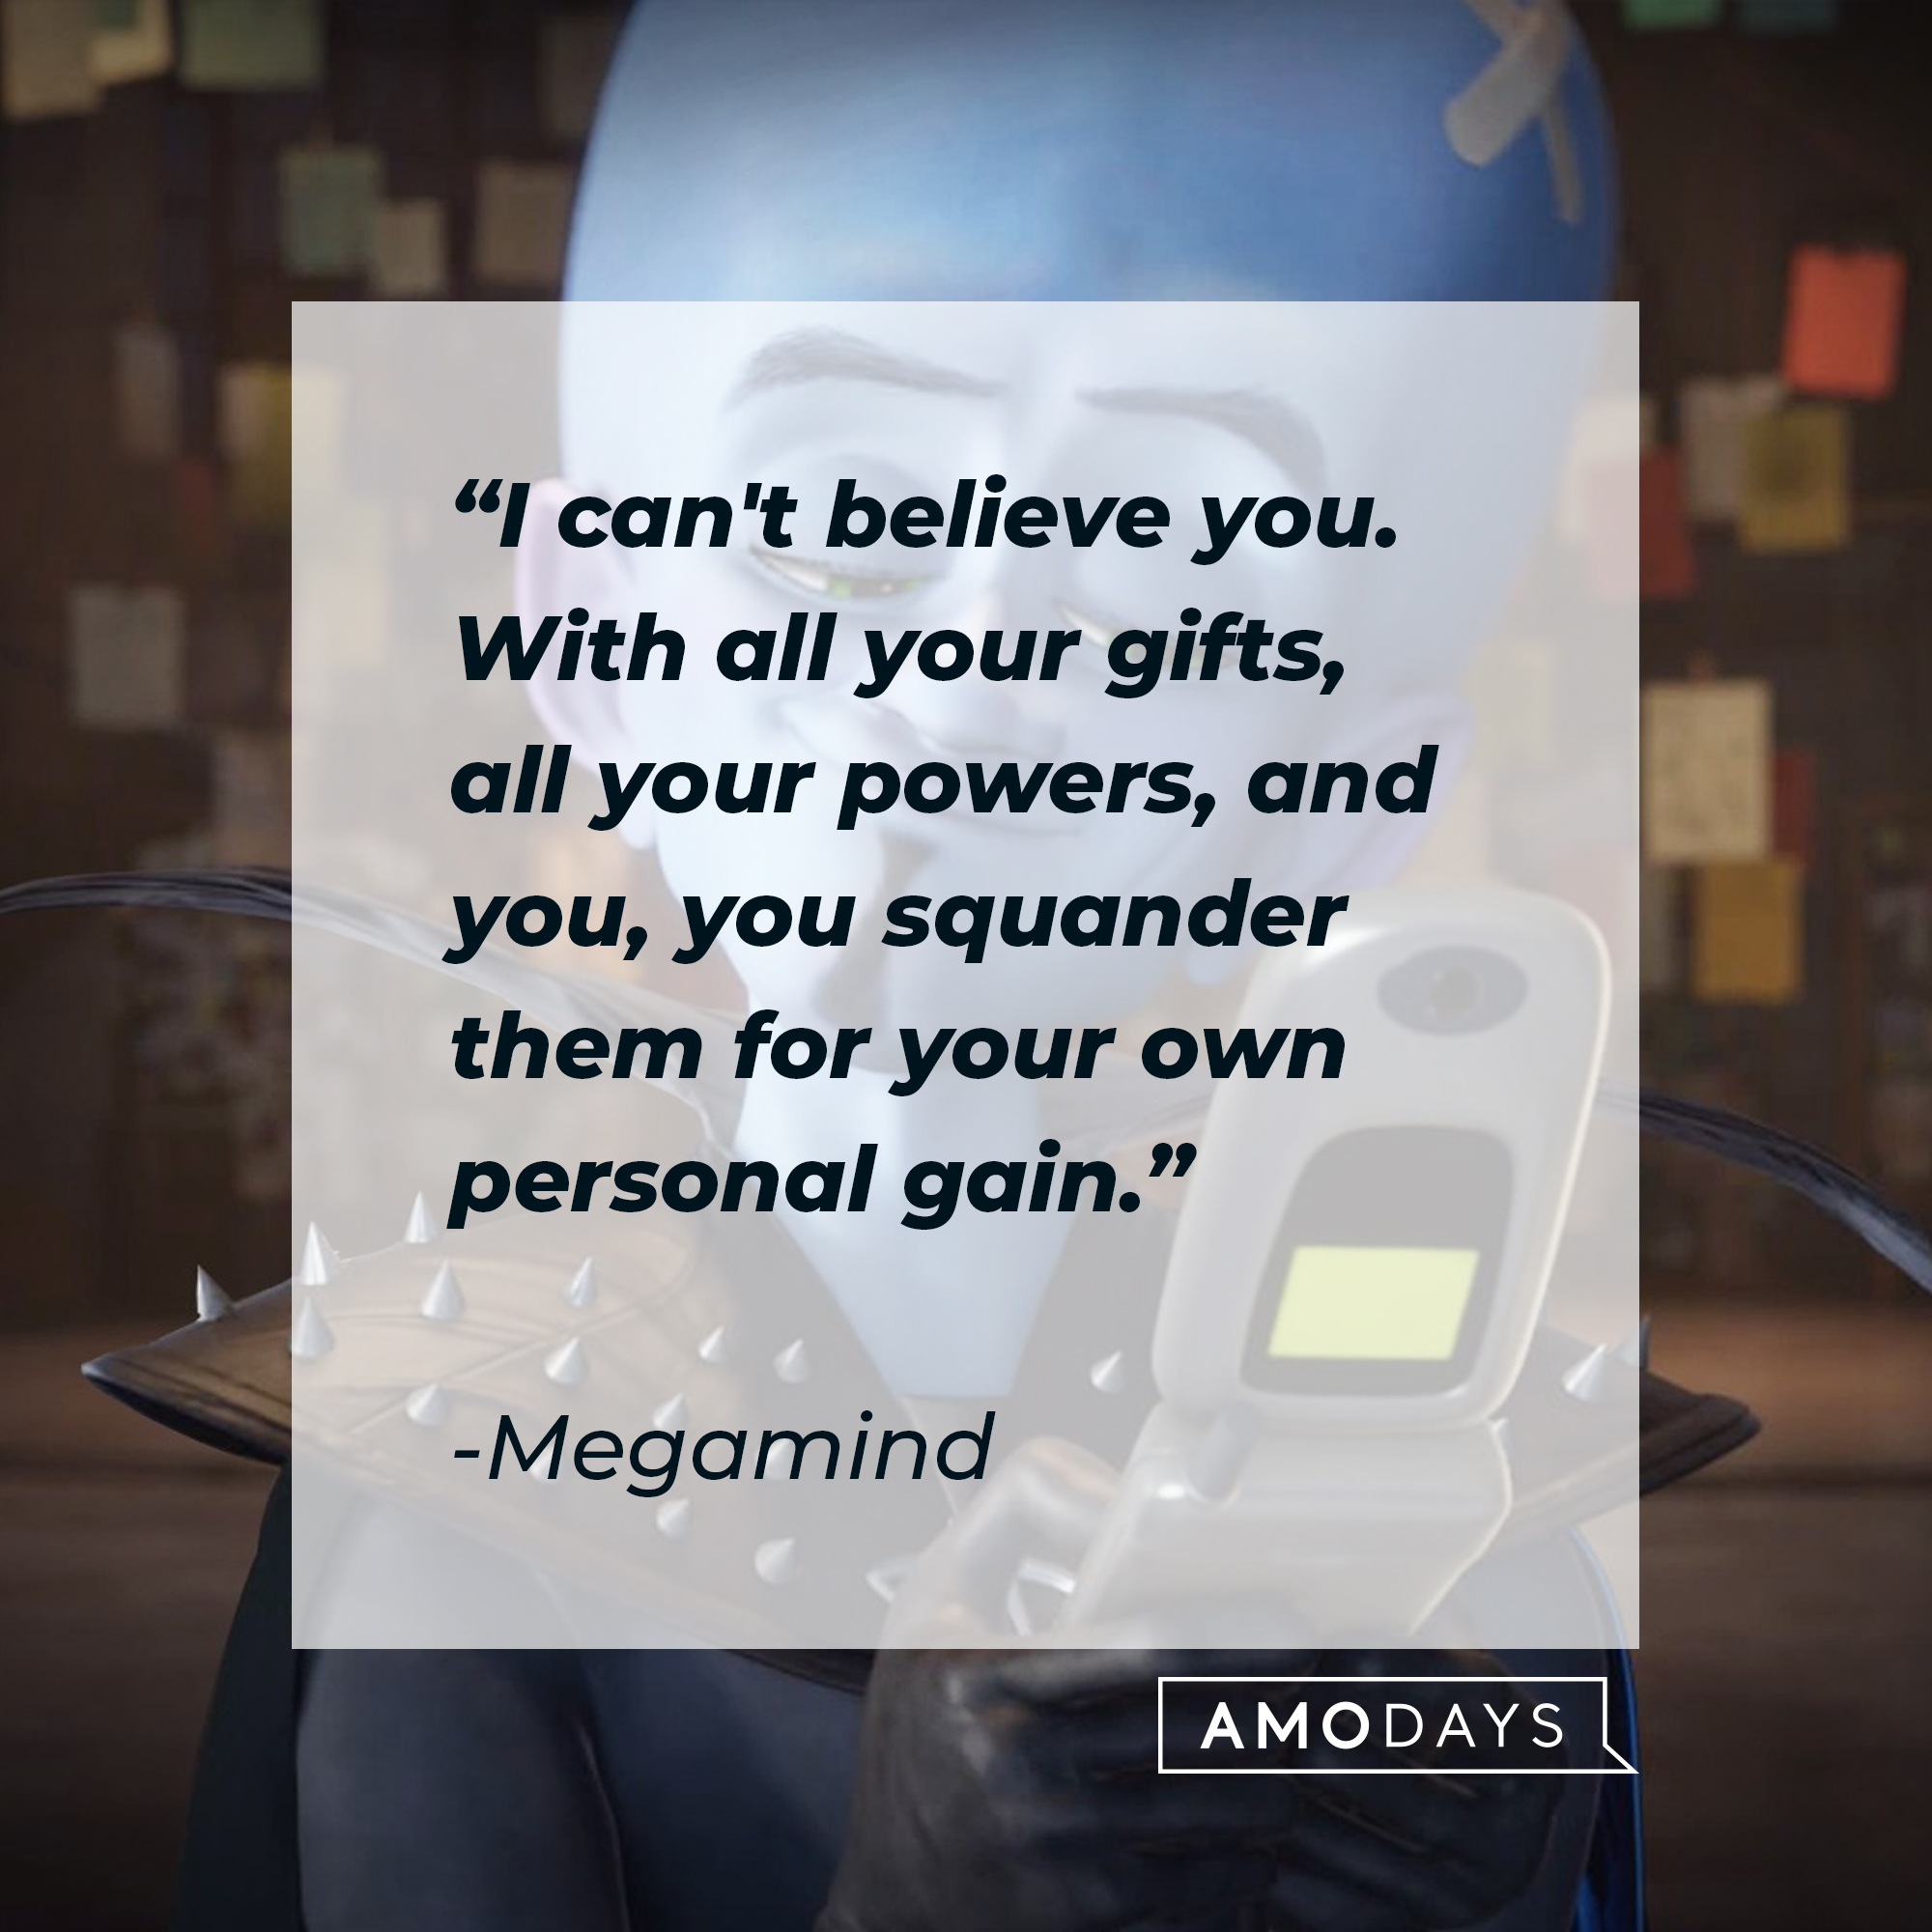 Megamind's quote: "I can't believe you. With all your gifts, all your powers, and you, you squander them for your own personal gain." | Source: Facebook.com/MegamindUK